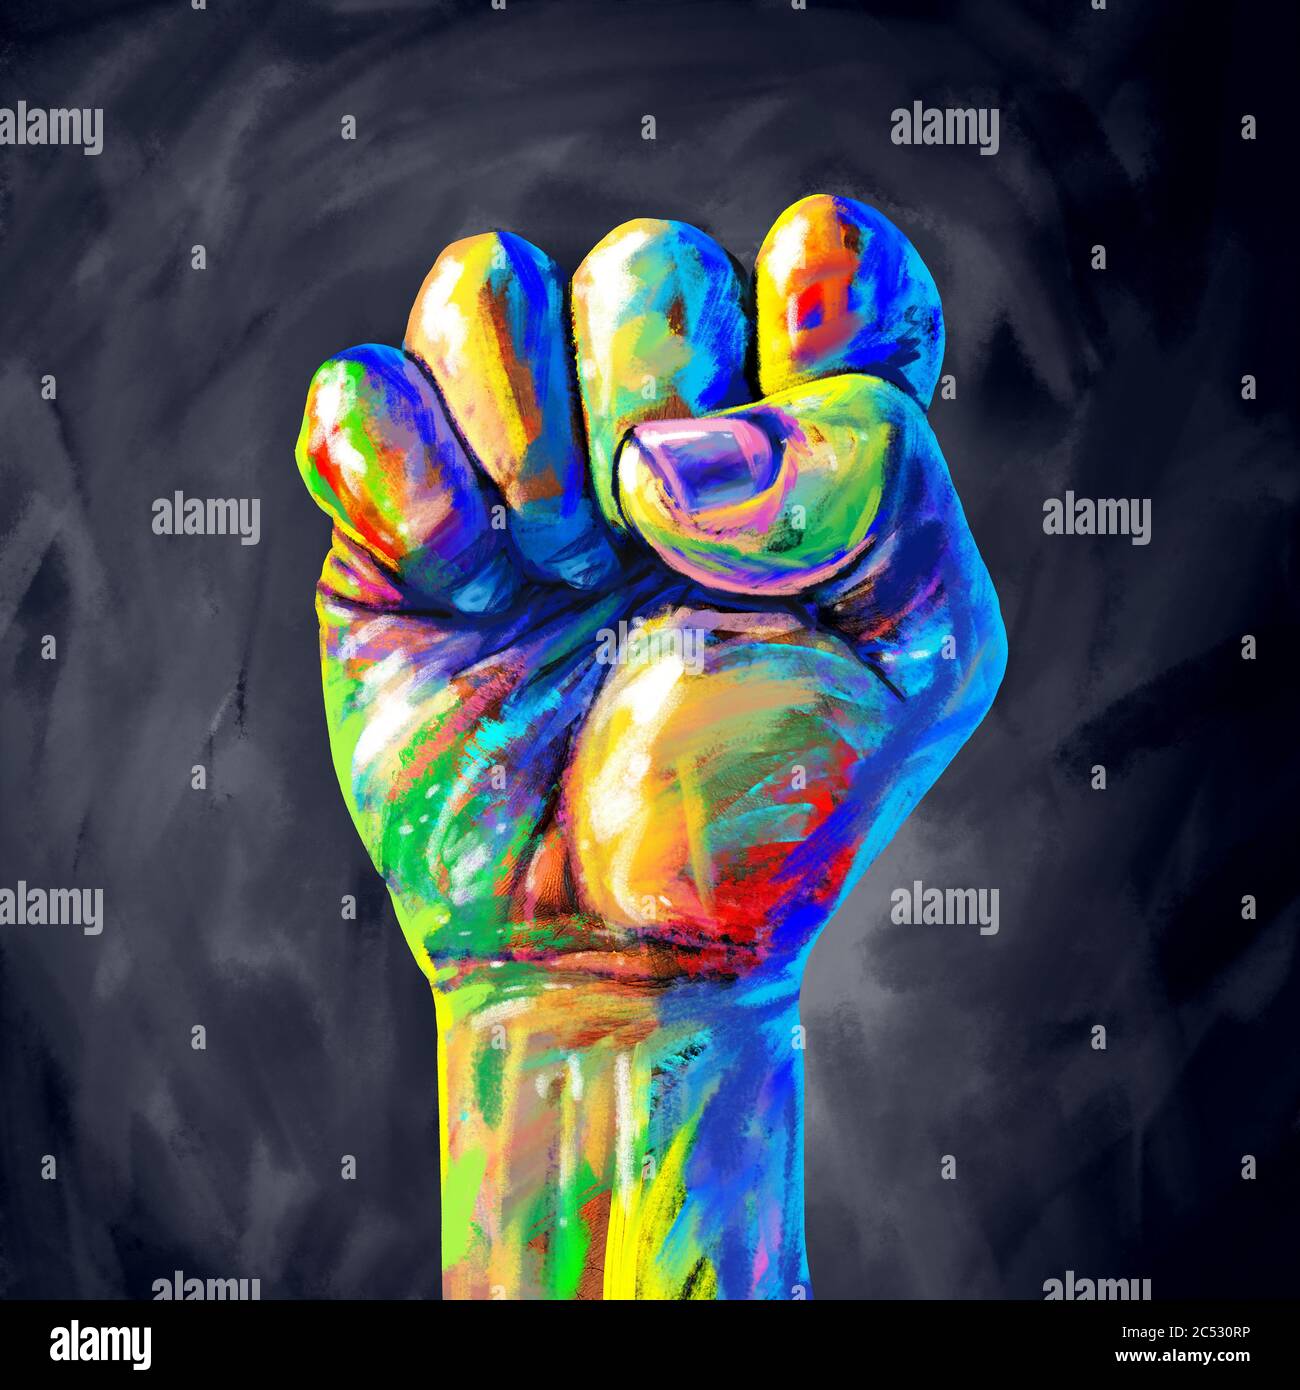 Justice abstract concept as a fist painted in diverse colors representing diversity and power of the community for equal rights and social fairness. Stock Photo